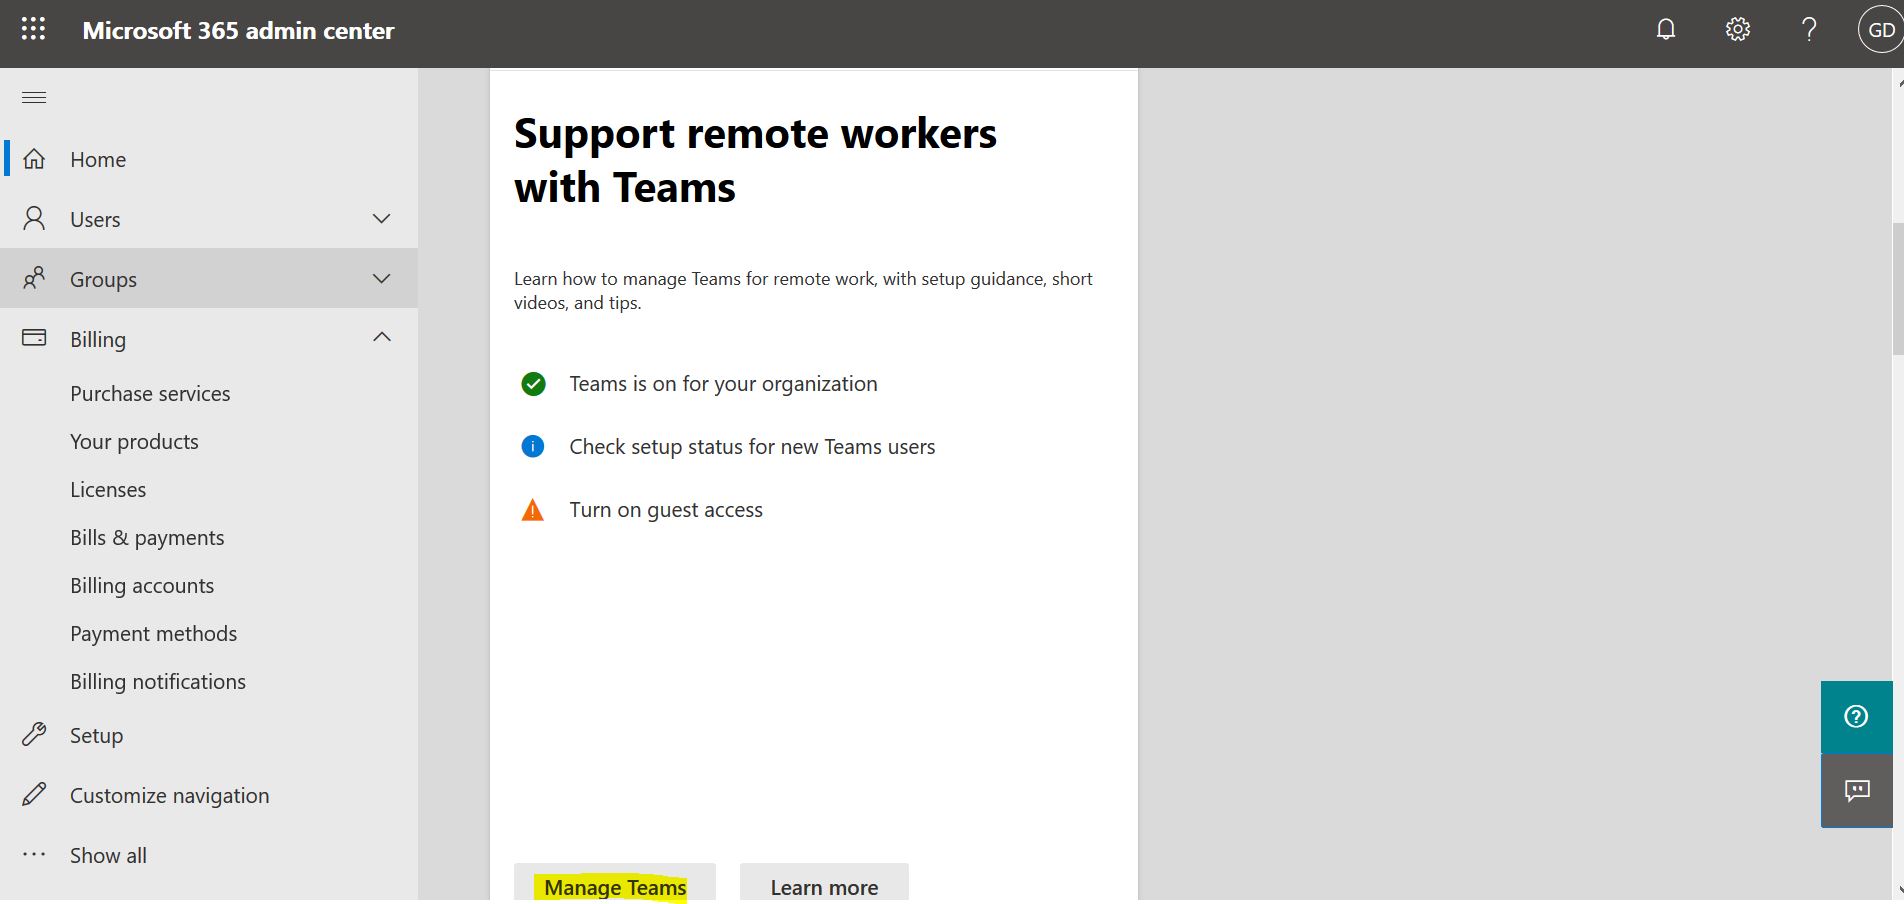 Support remote workers with ‎Teams‎ in Office 365 - Microsoft 365 admin center